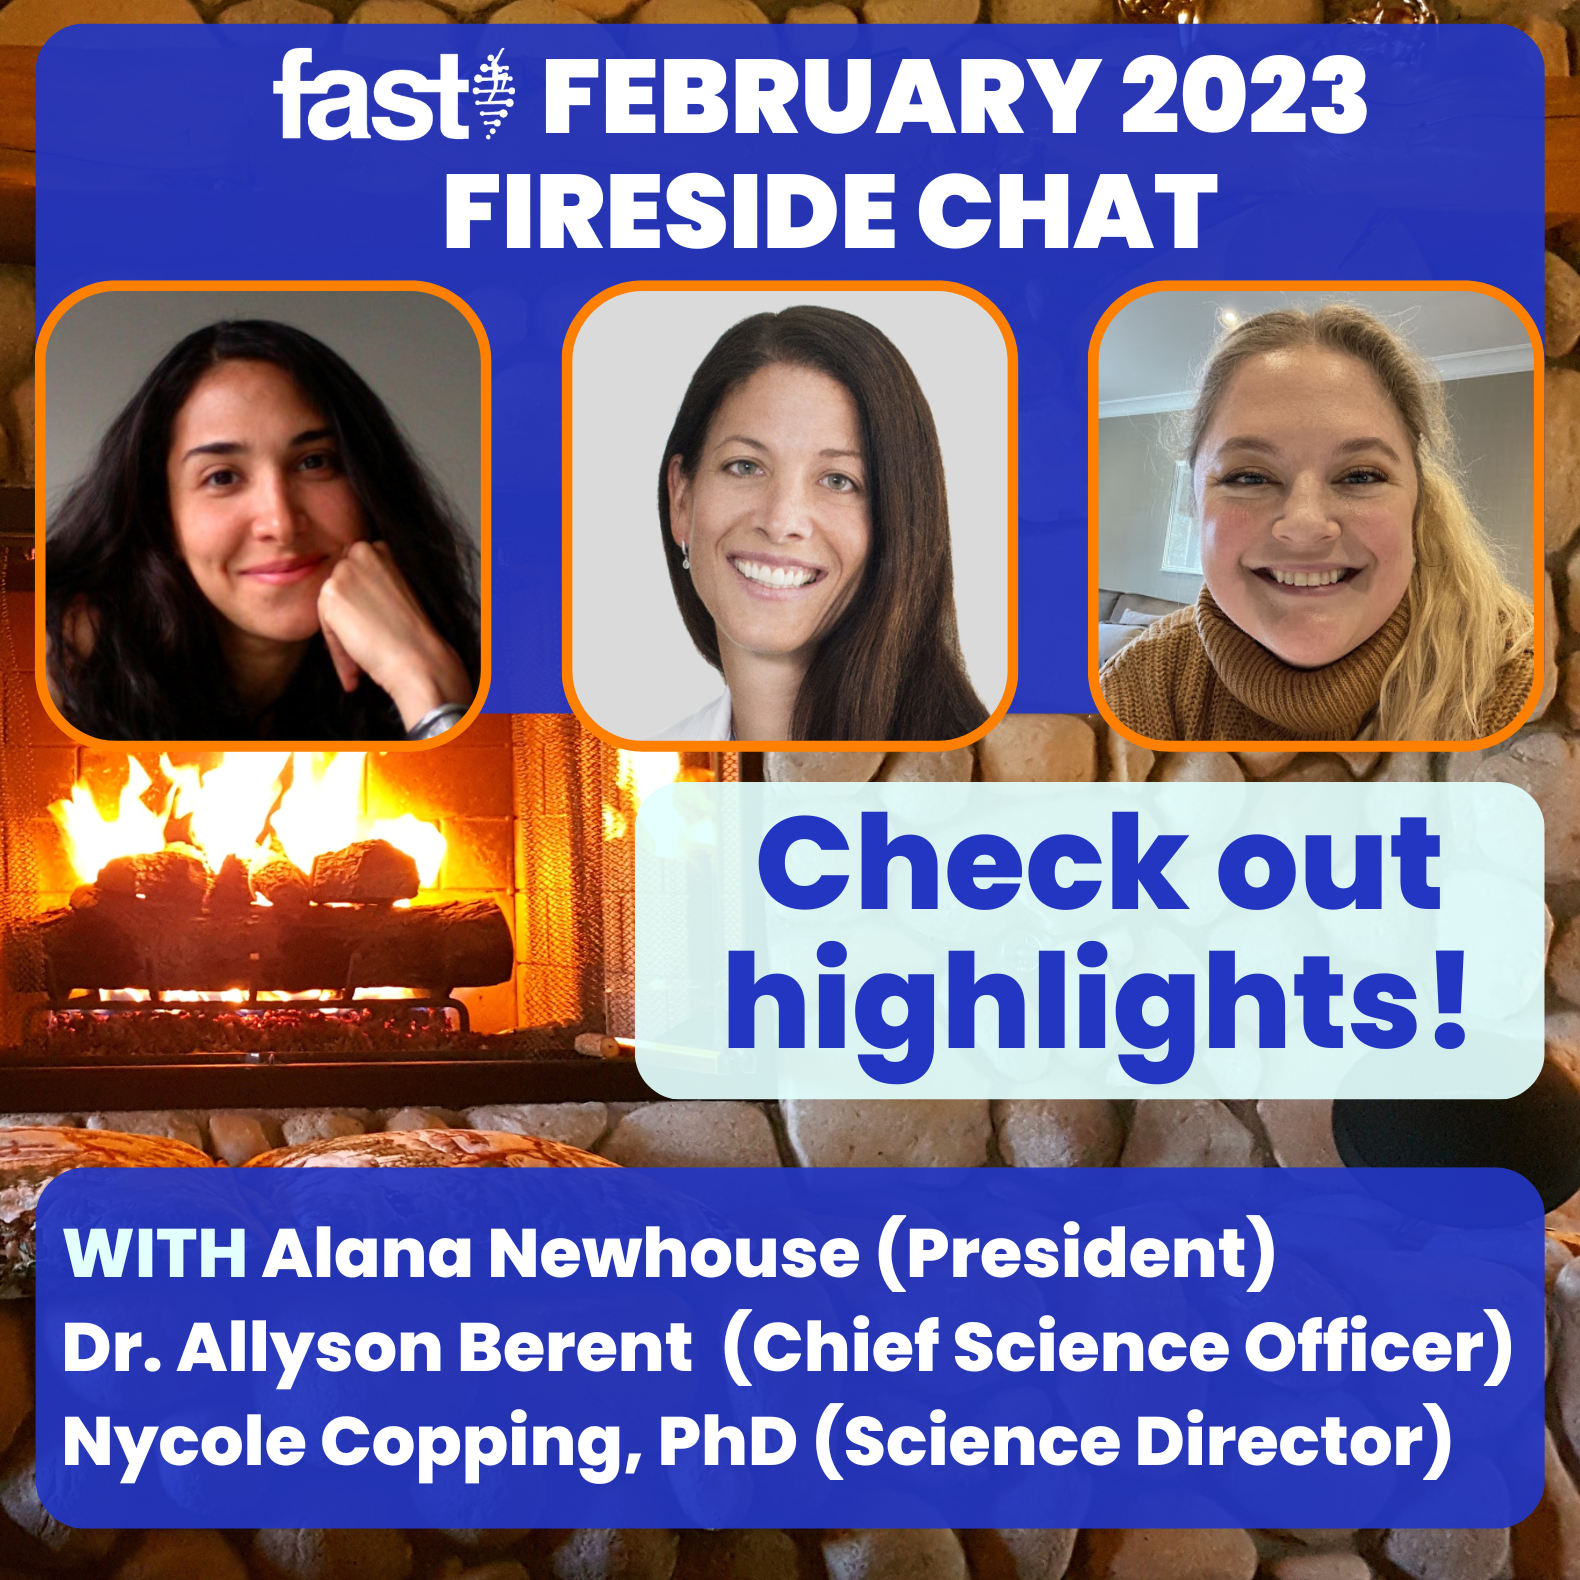 FAST February 2023 Fireside chat - check out highlights! With Alana Newhouse (President), Dr. Allyson Berent (Chief Science Officer), and Nycole Copping (Science Director)